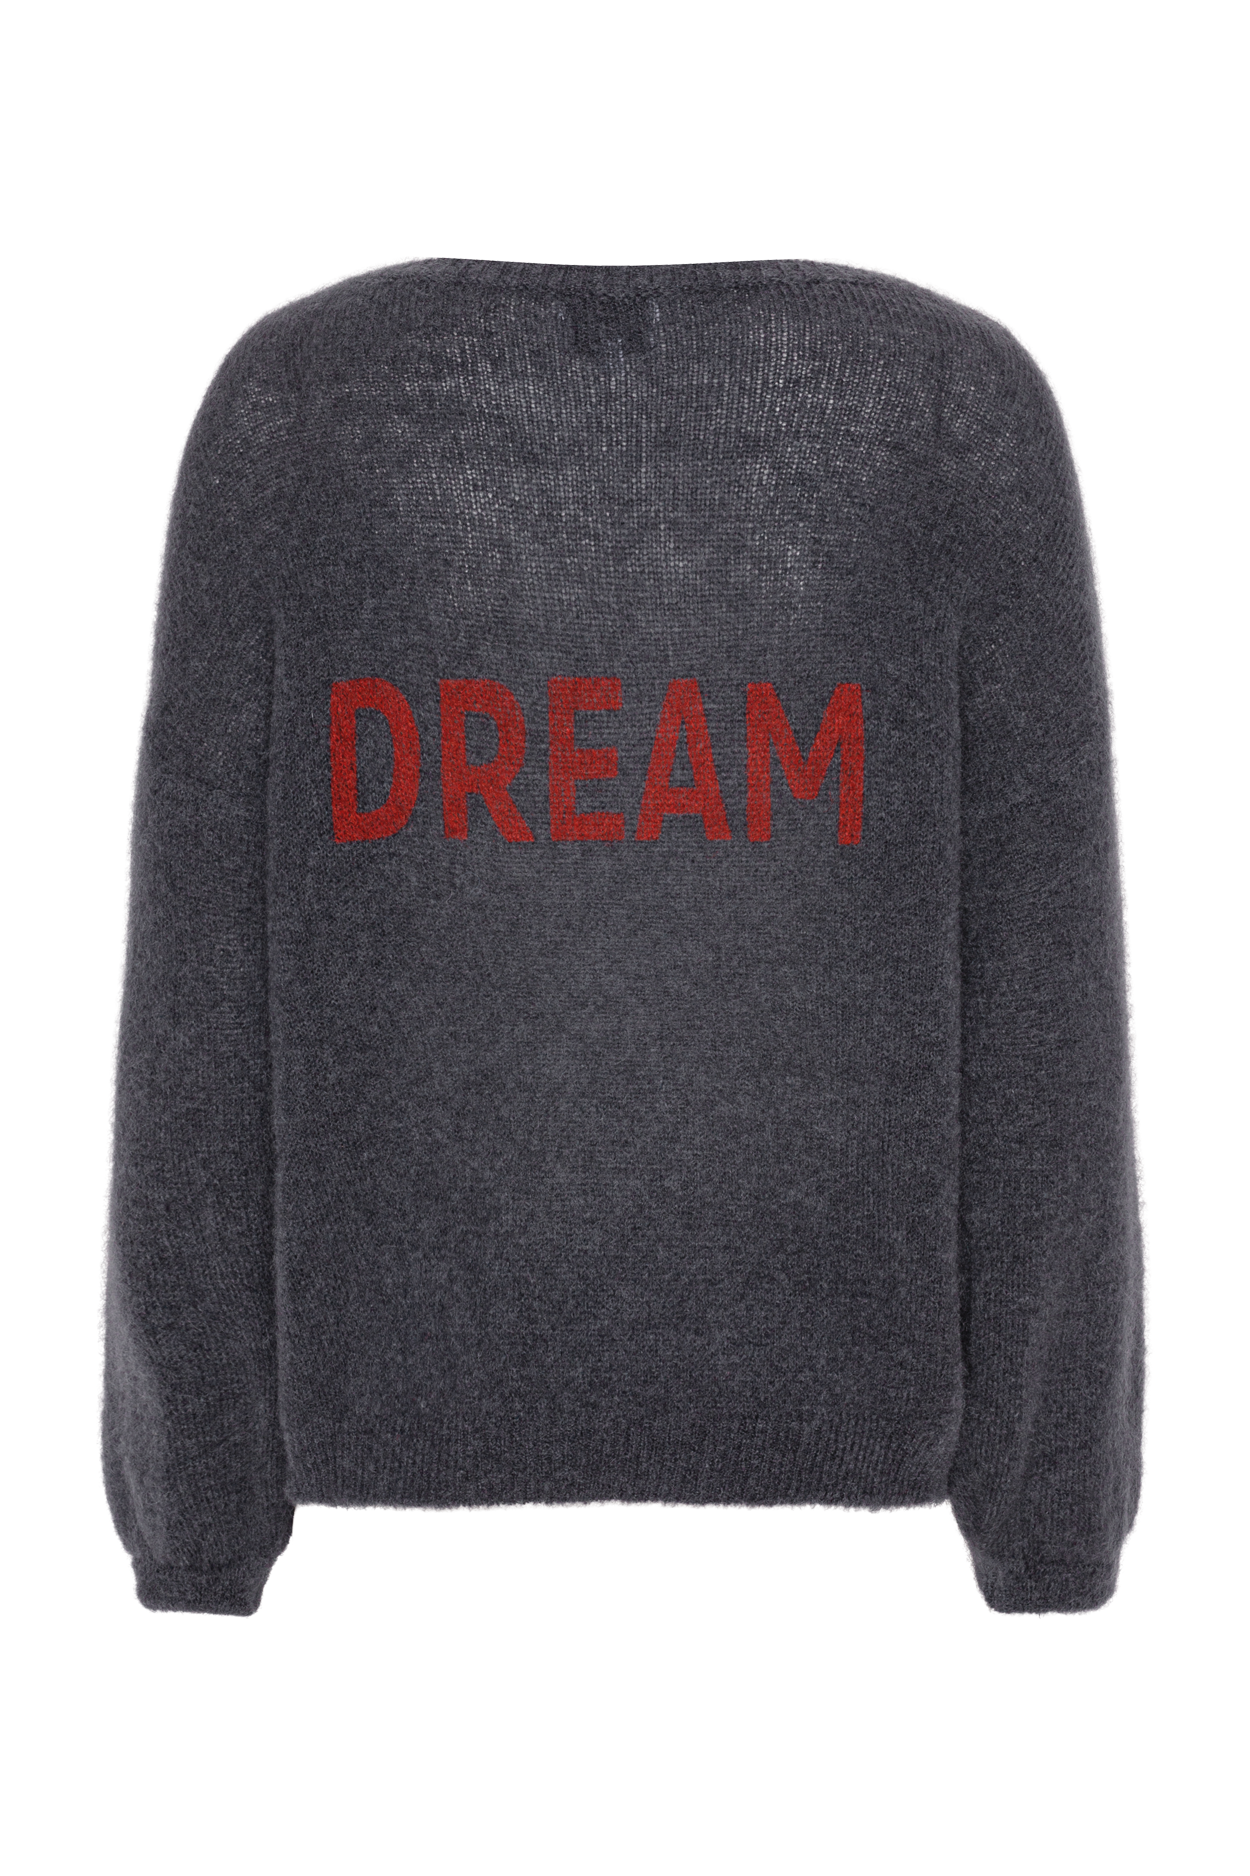 Silja Back Letters Anthracite Grey W/ Coral Red Letters (DREAM)